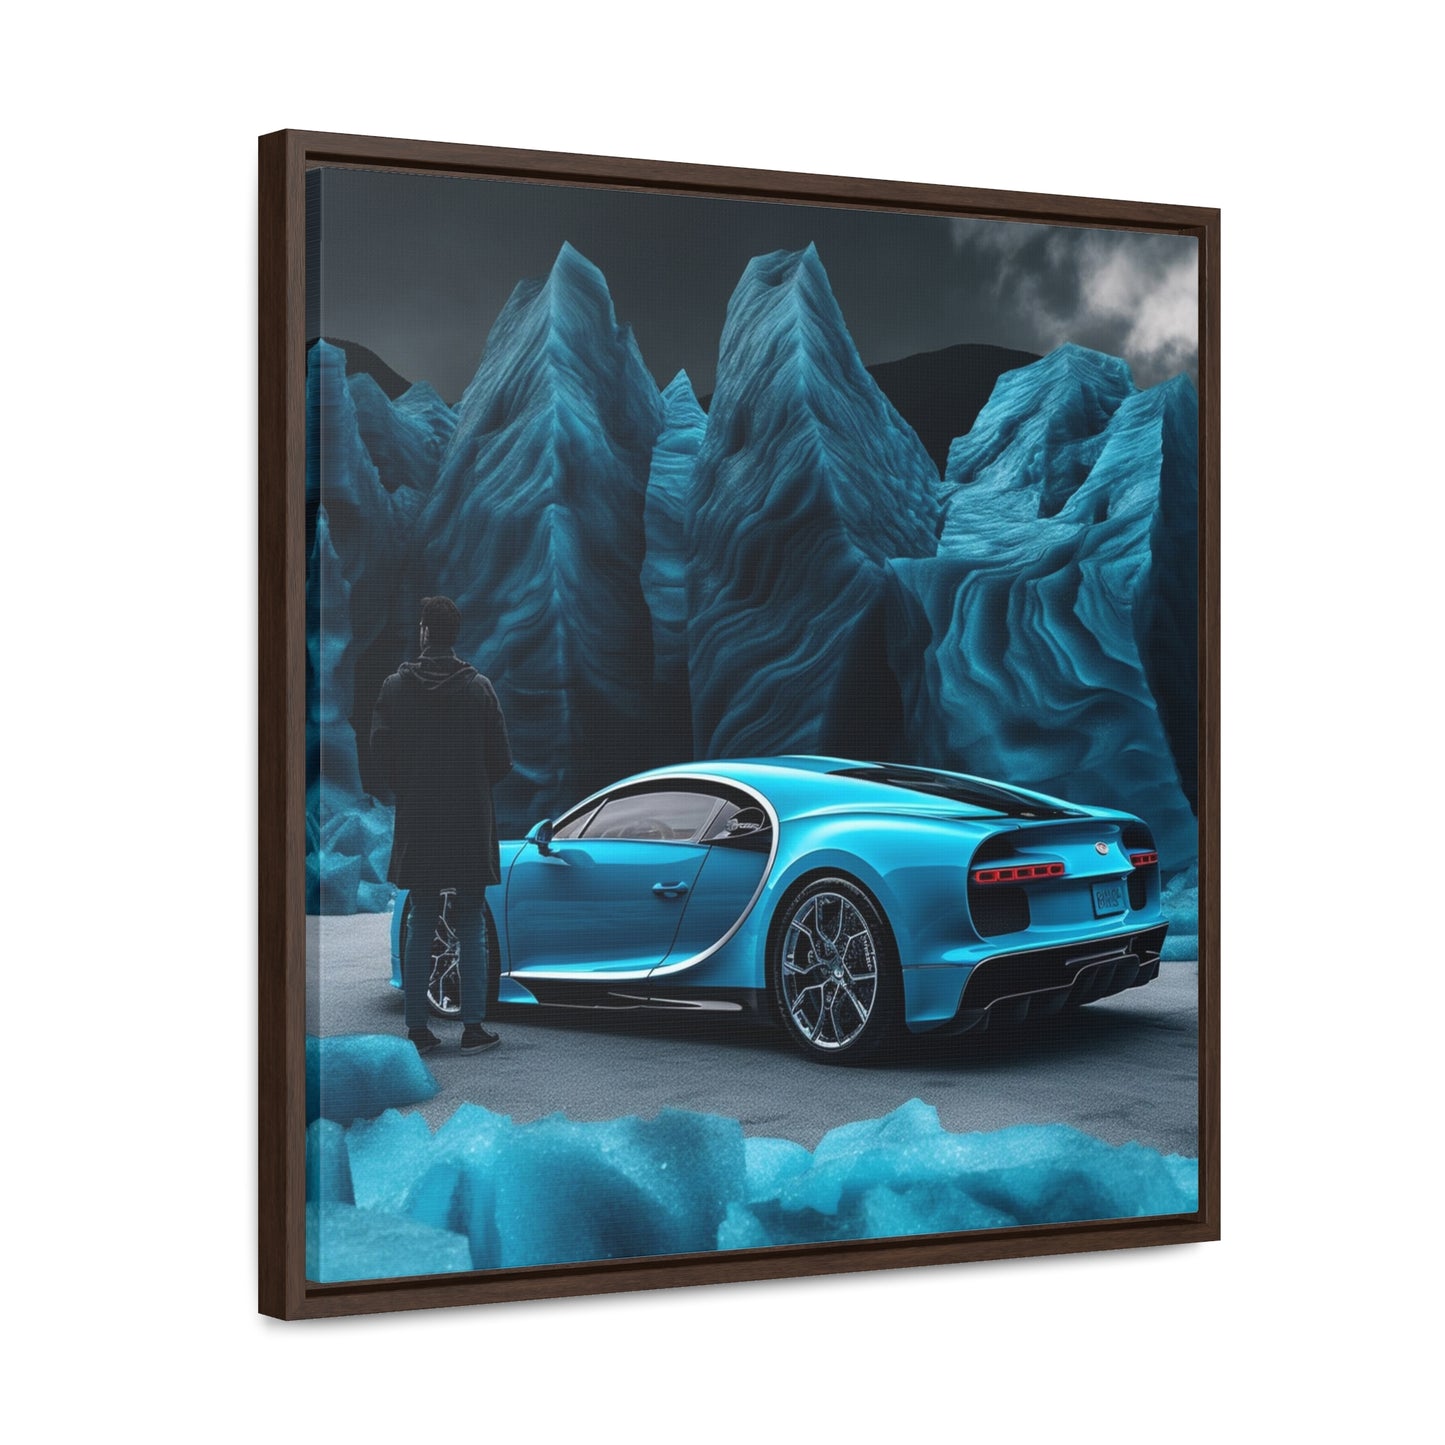 Gallery Canvas Wraps, Square Frame Bugatti Real Look 3